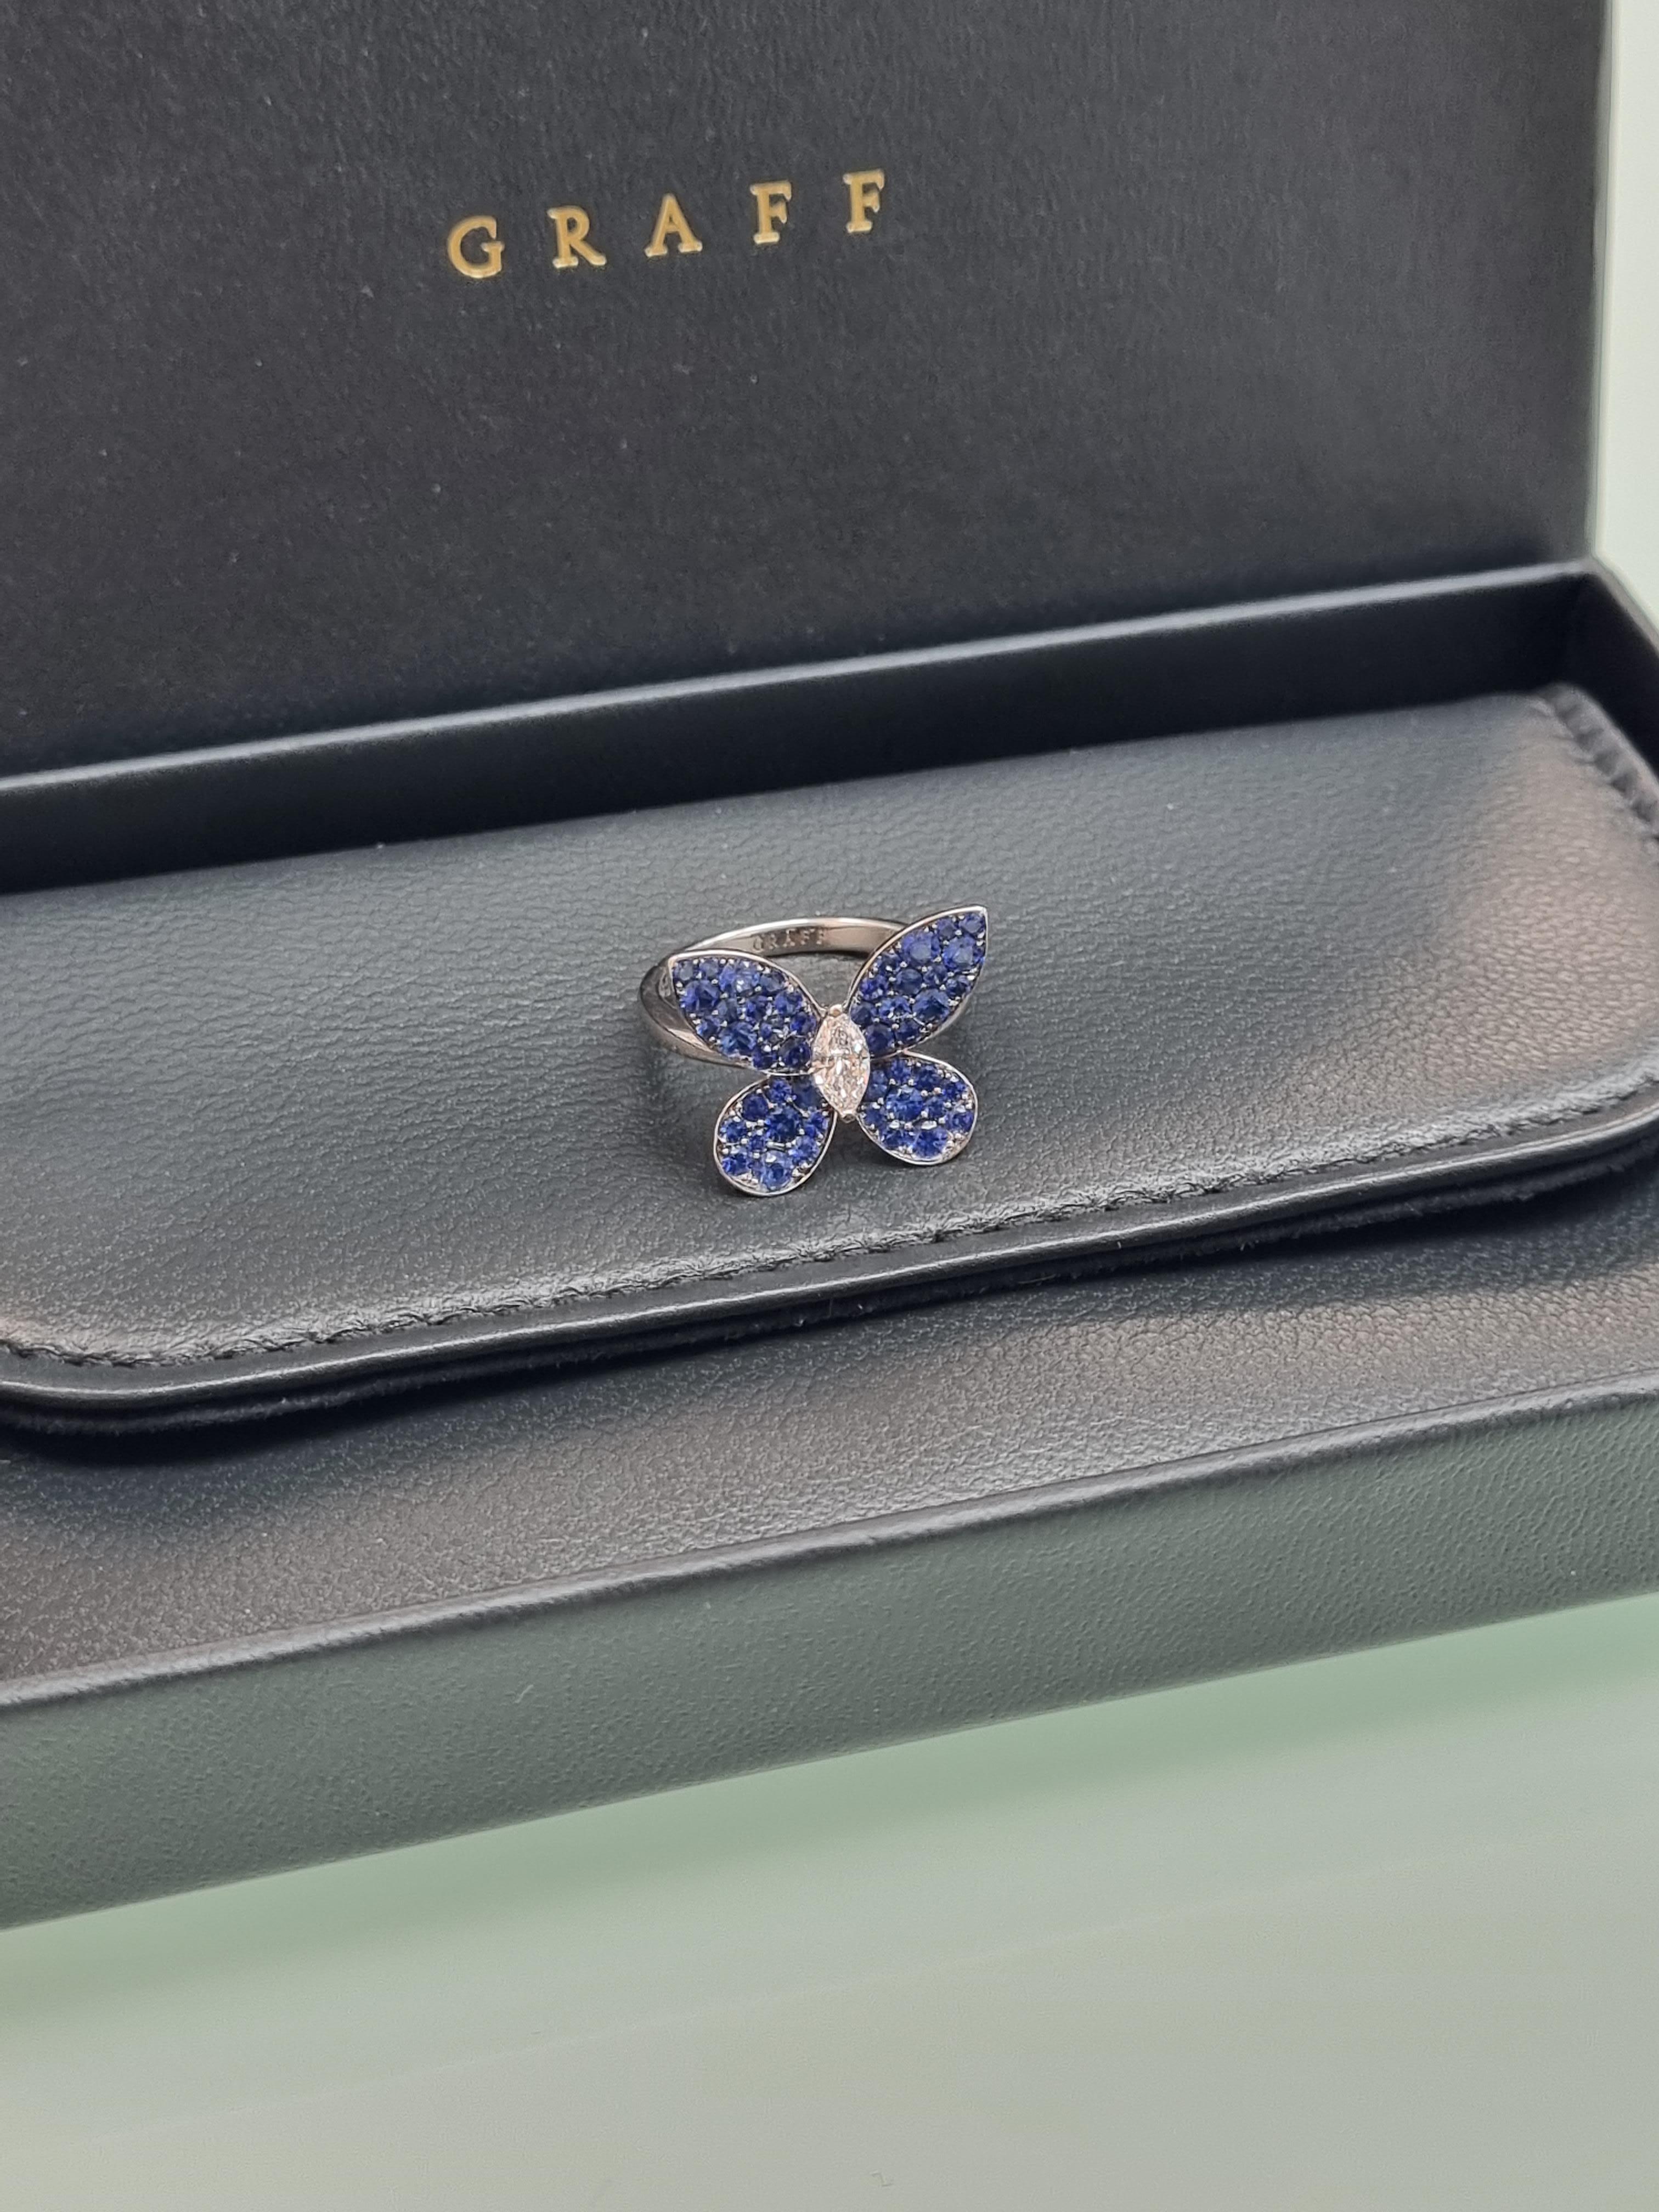 Graff Butterfly 18k White Gold Diamond And Sapphire Ring In New Condition For Sale In South Woodford, GB